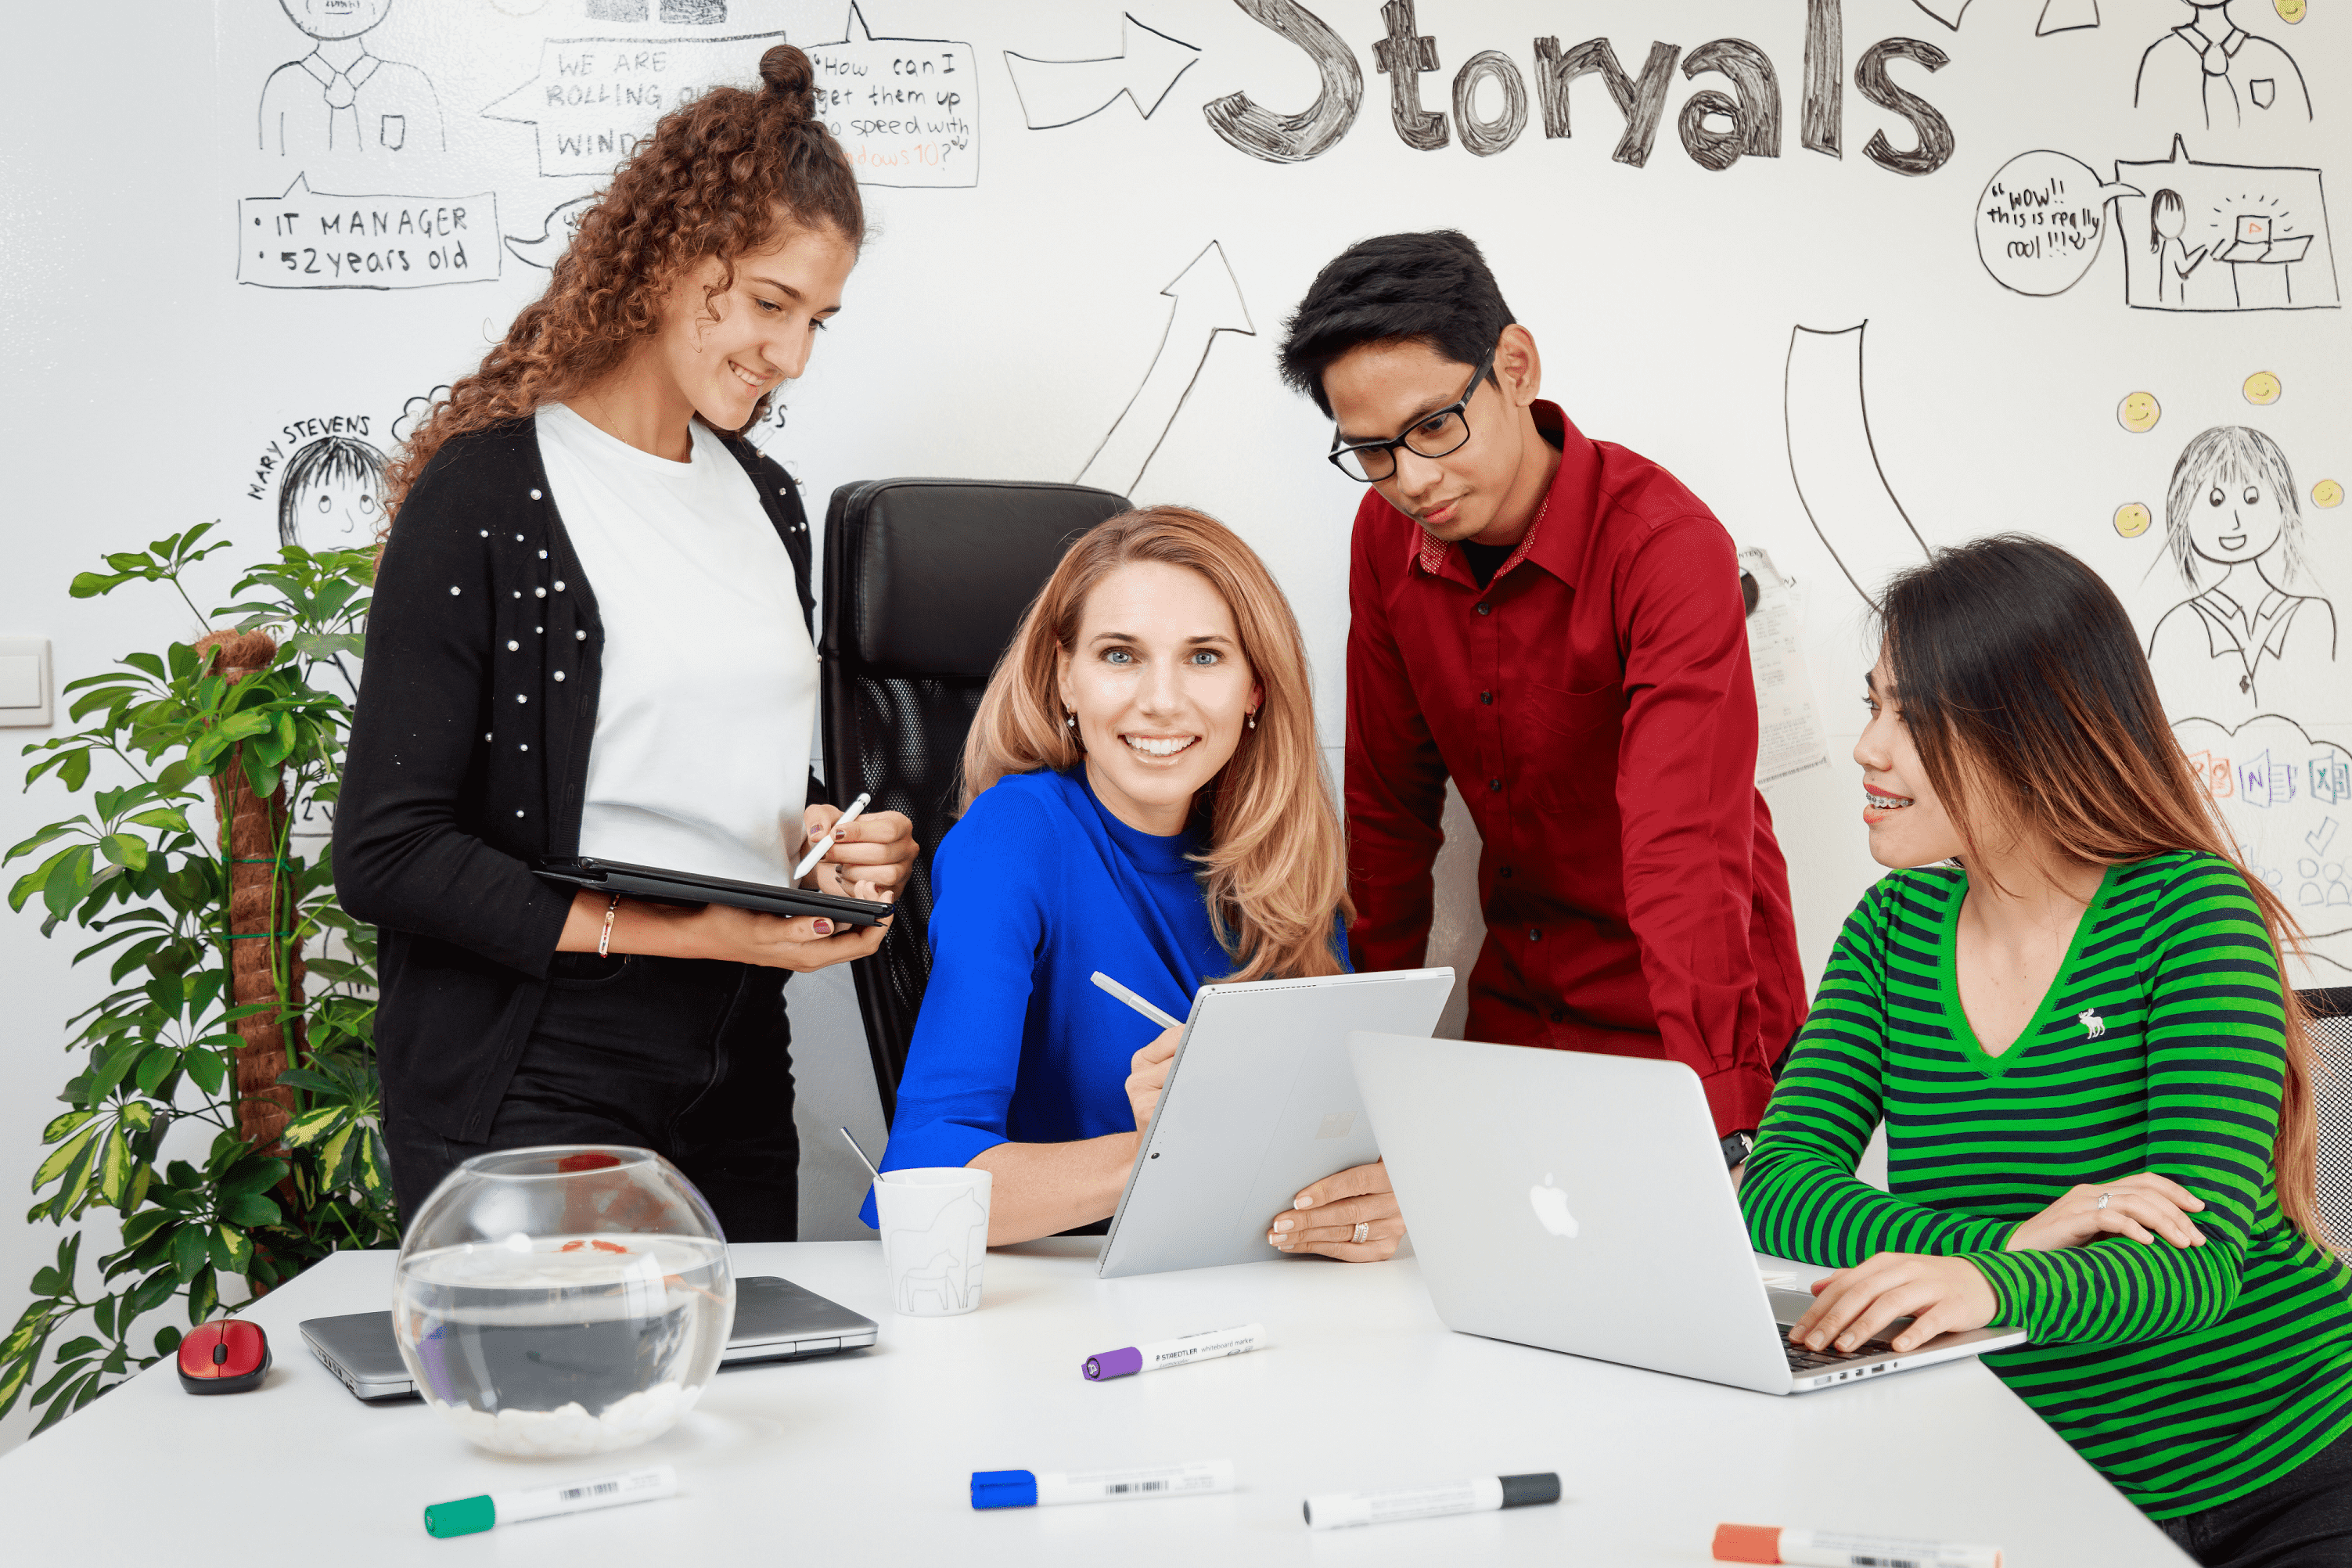 storyals-transforms-their-business-model-and-releases-two-new-products-in-three-months